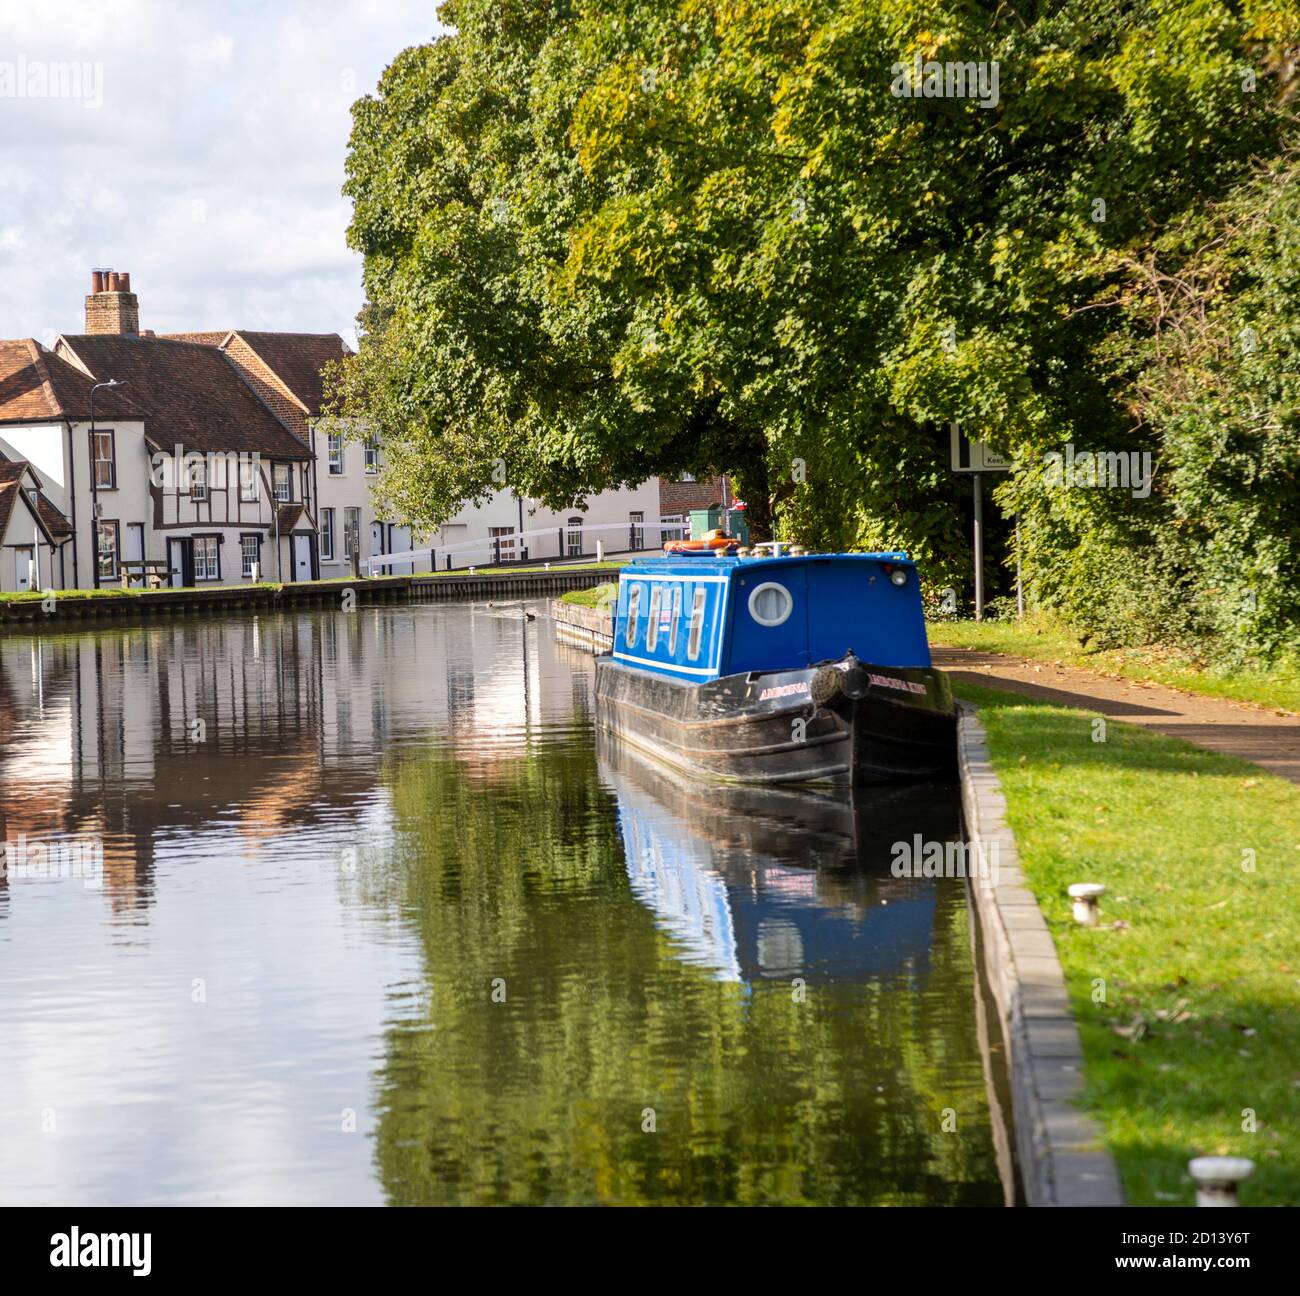 Narrow boat on the Kennet and Avon canal in the town centre of Newbury, Berkshire, England, UK Stock Photo